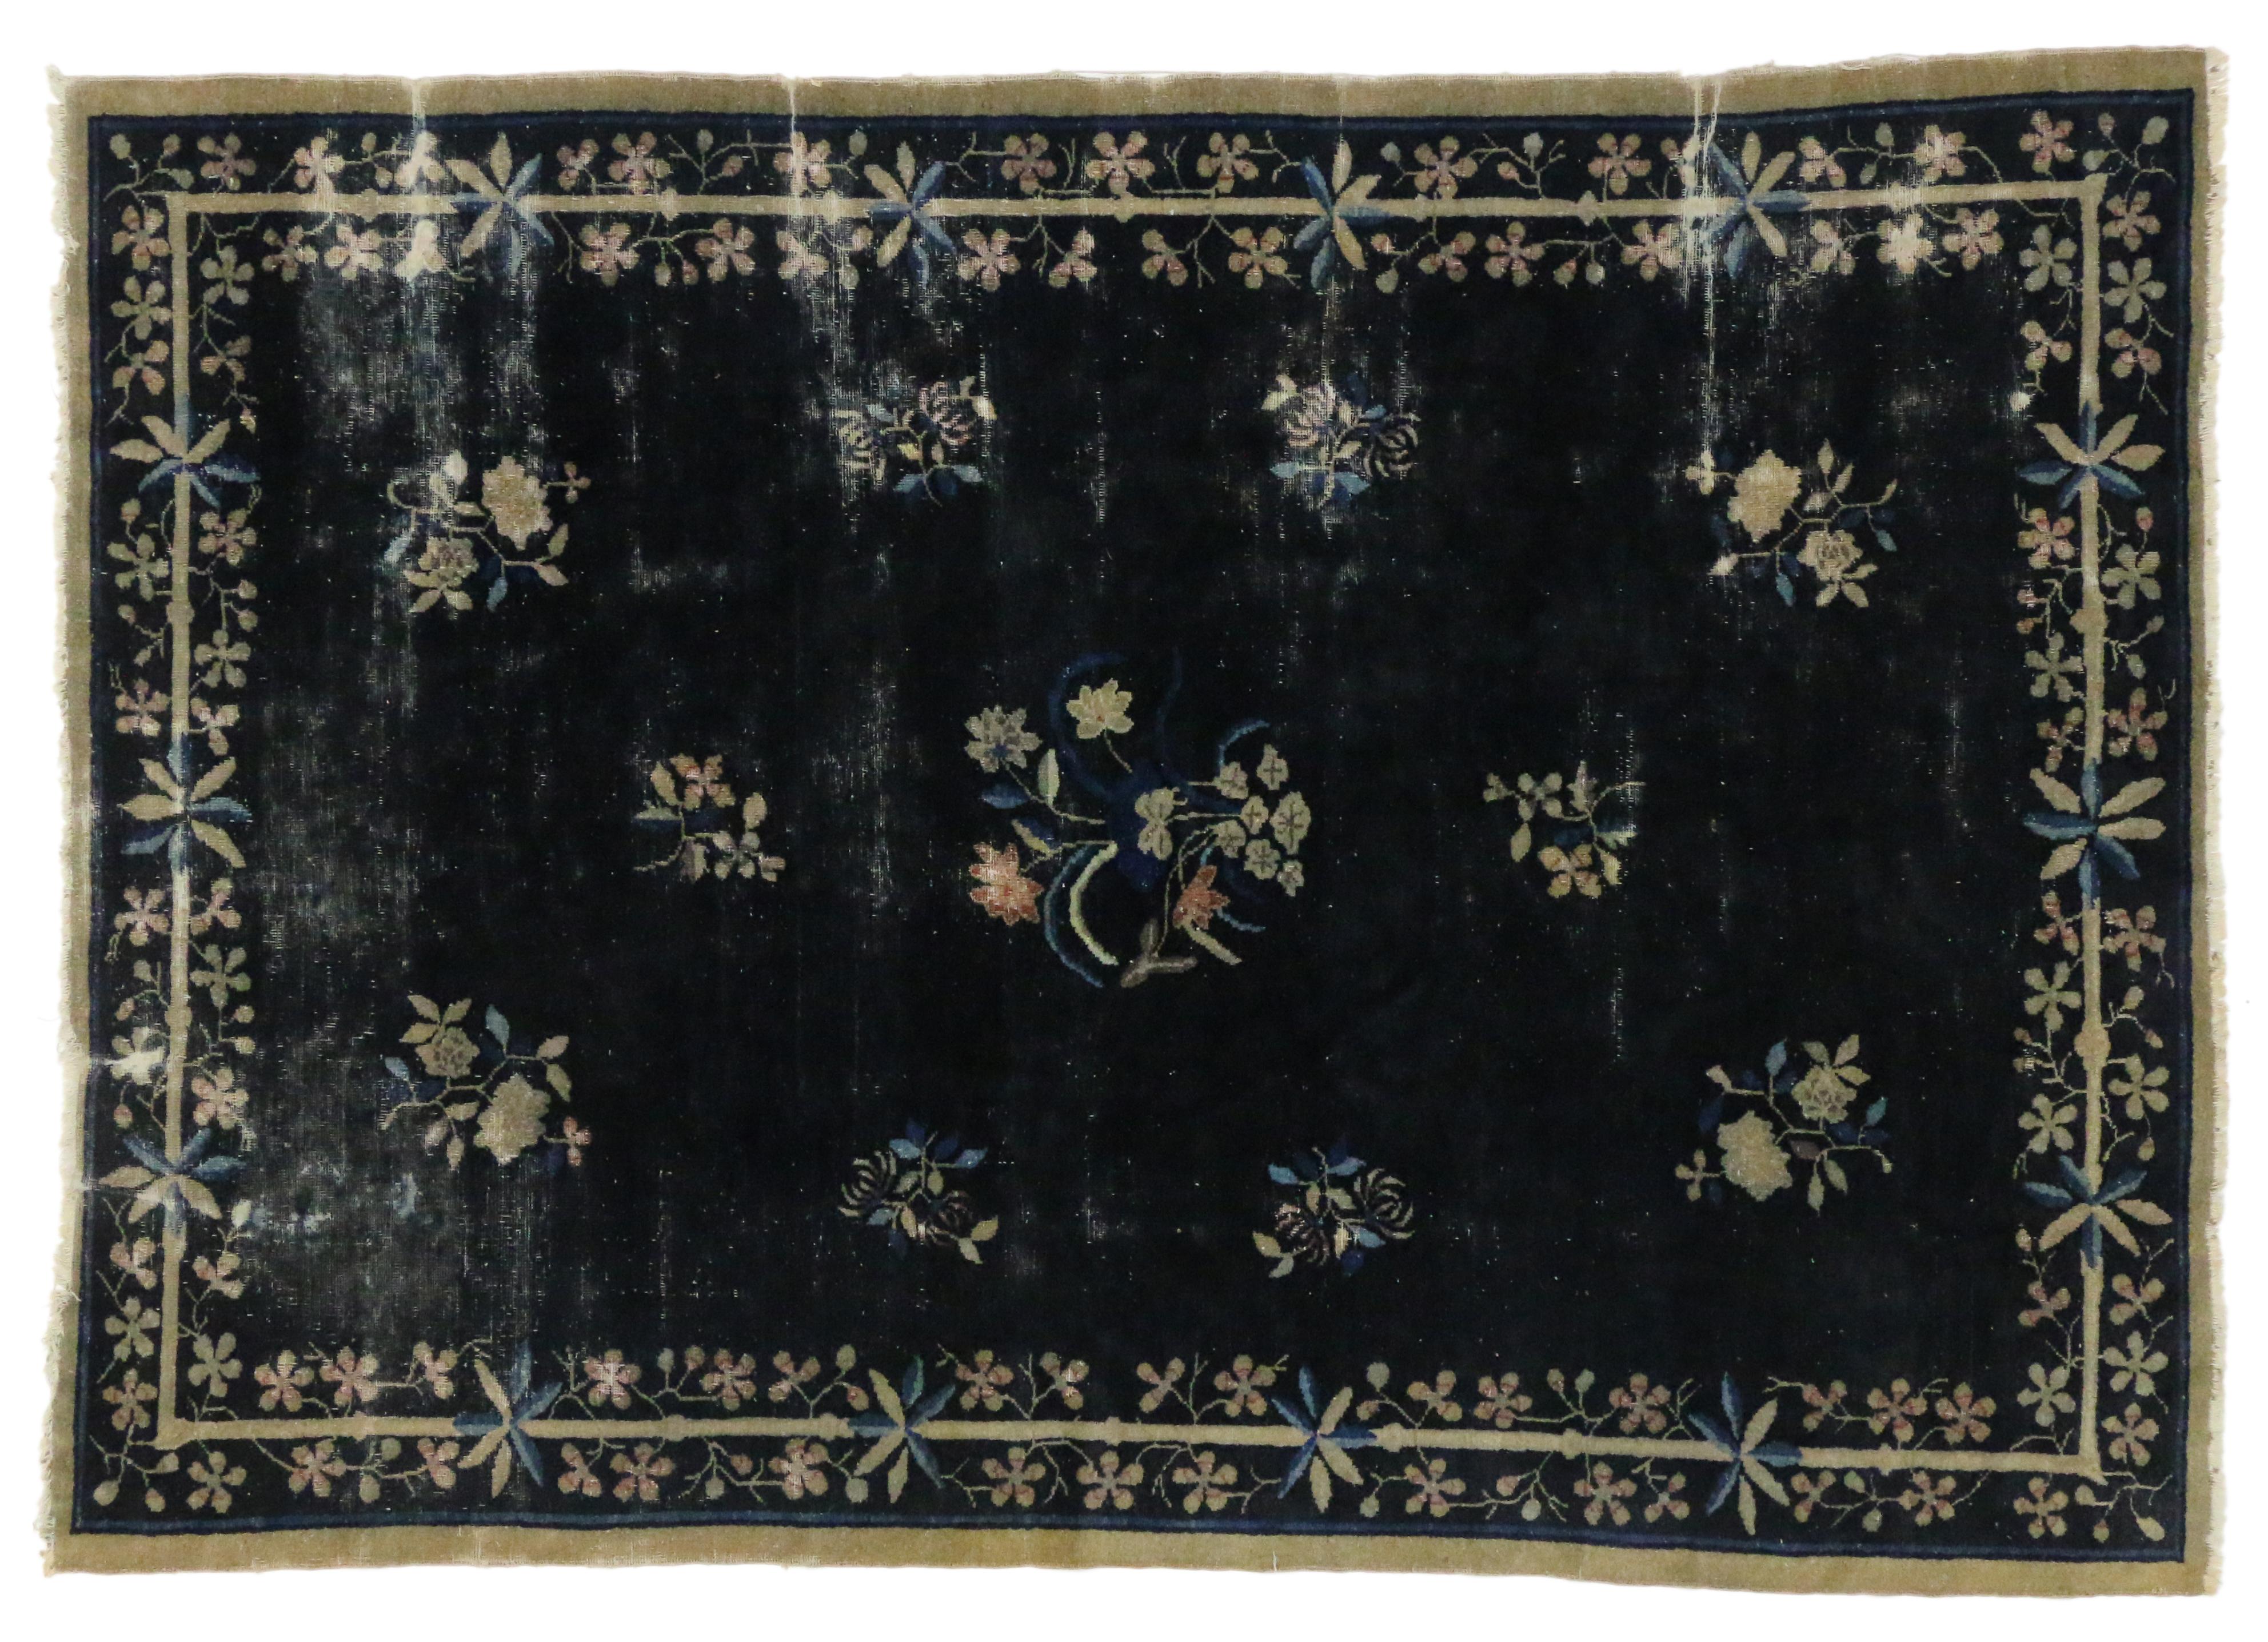 Hand-Knotted Distressed Antique Chinese Peking Rug with Jazz Age Chinoiserie Style